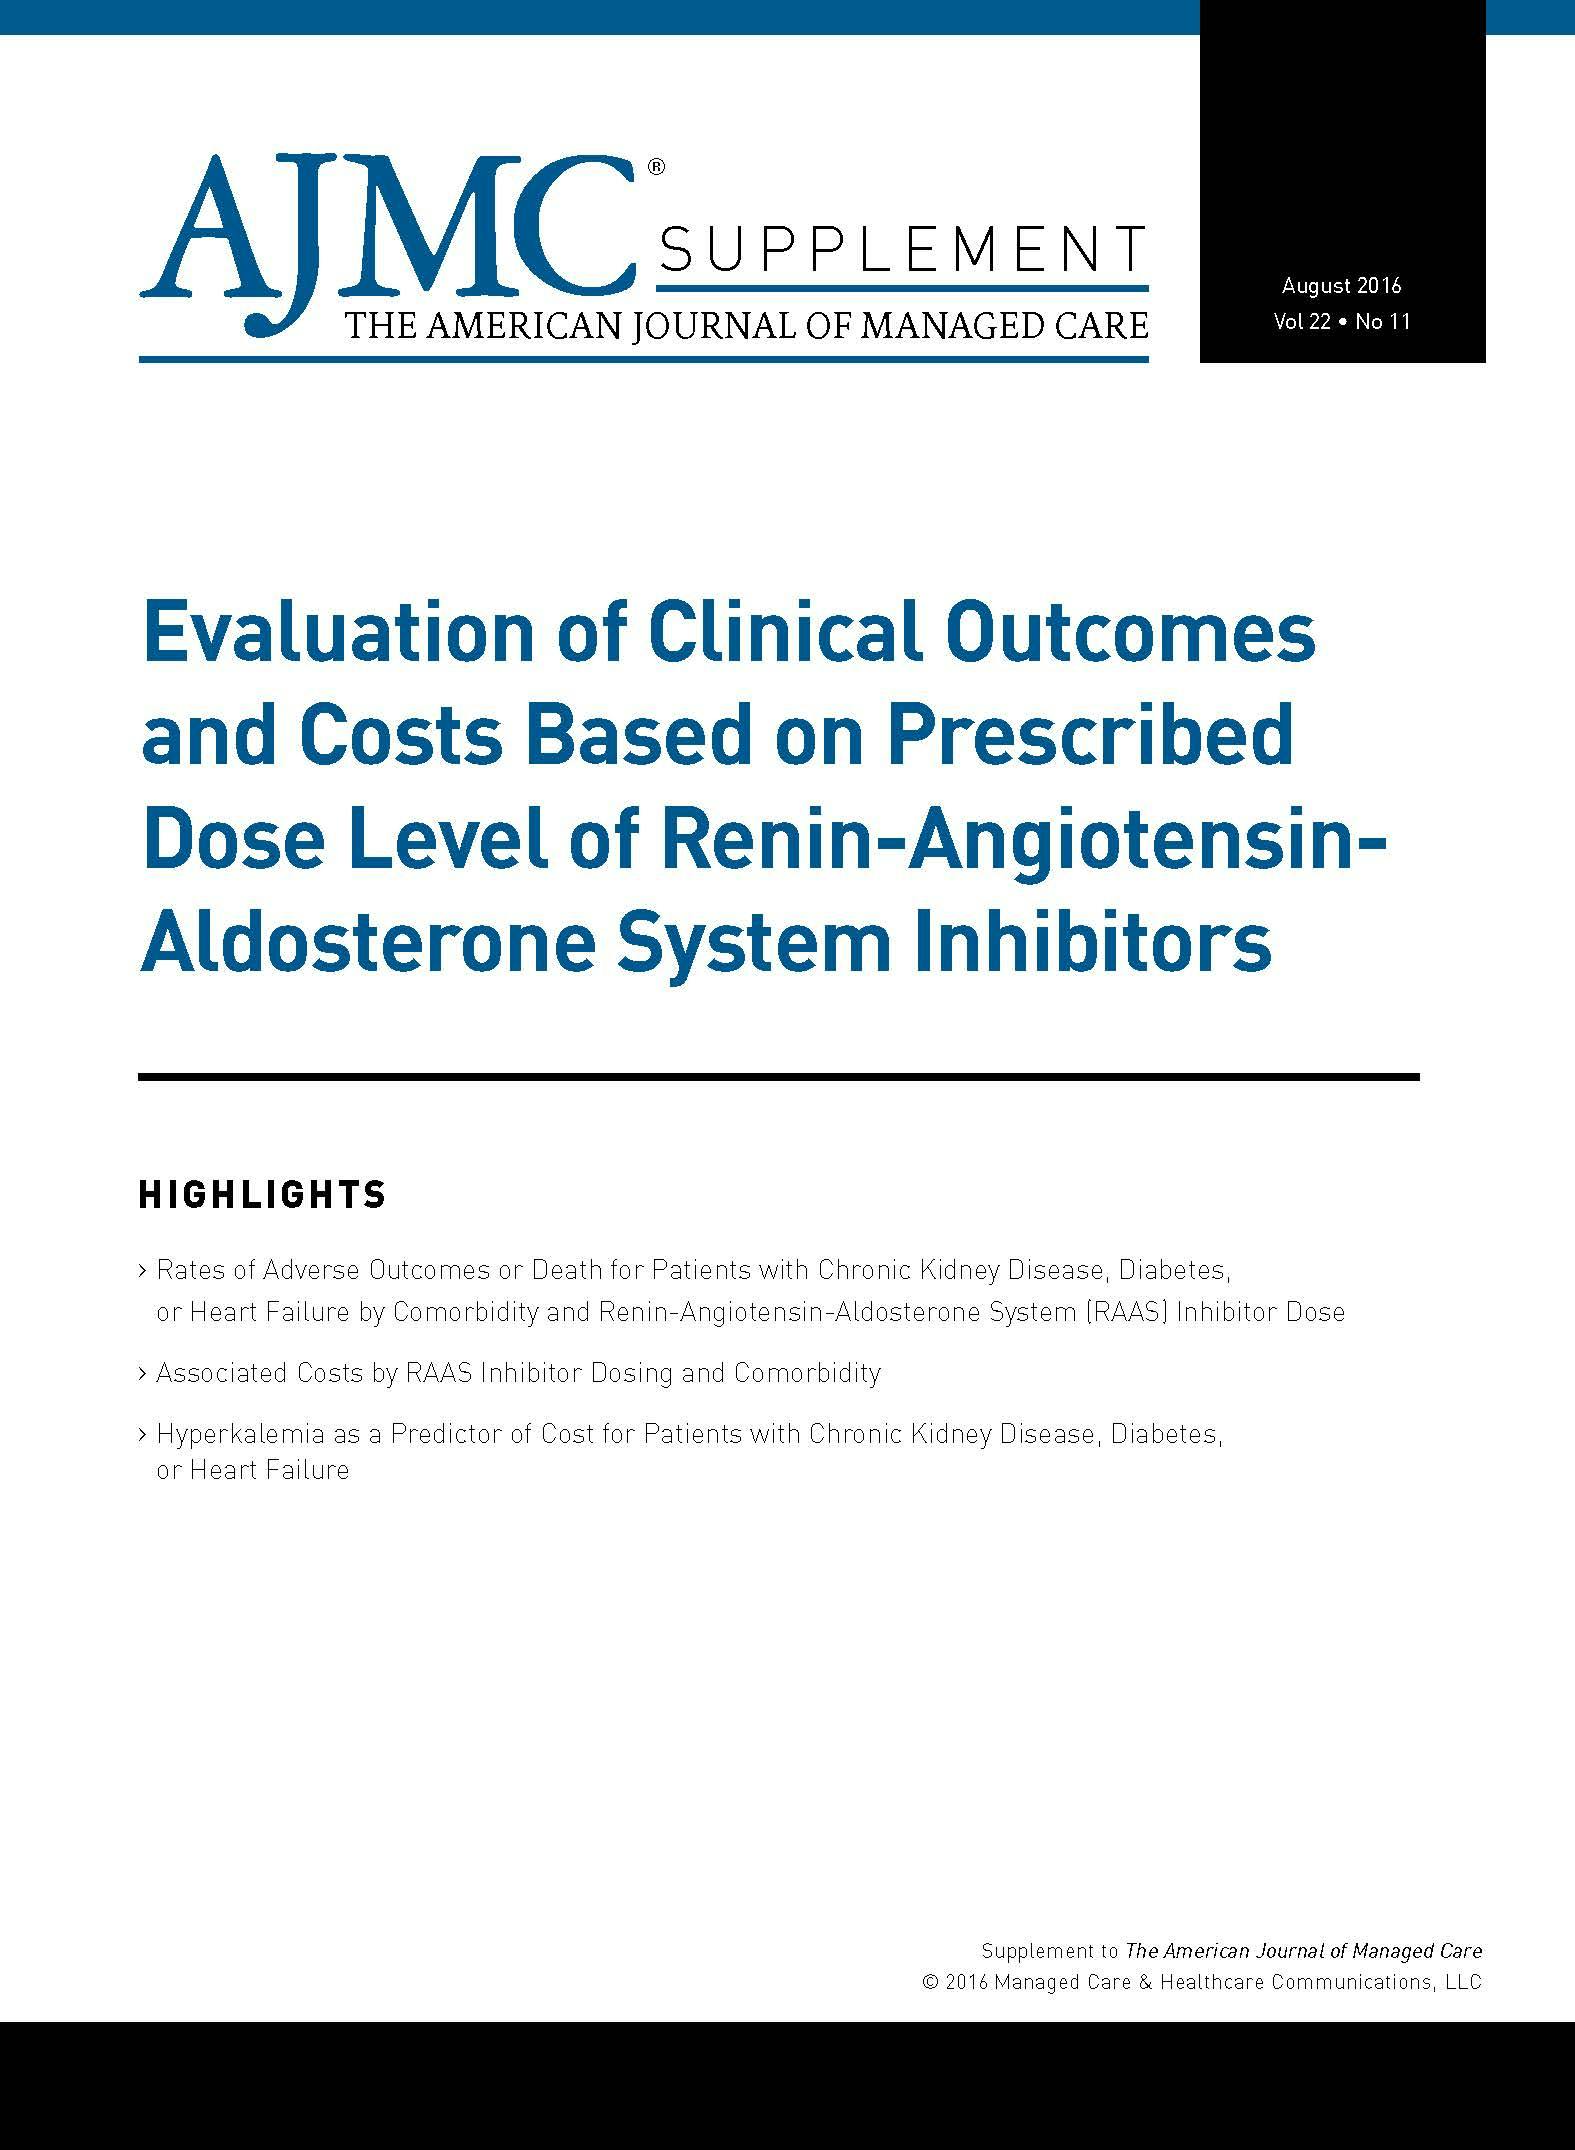 Evaluation of Clinical Outcomes and Costs Based on Prescribed Dose Level of Renin-Angiotensin-Aldost